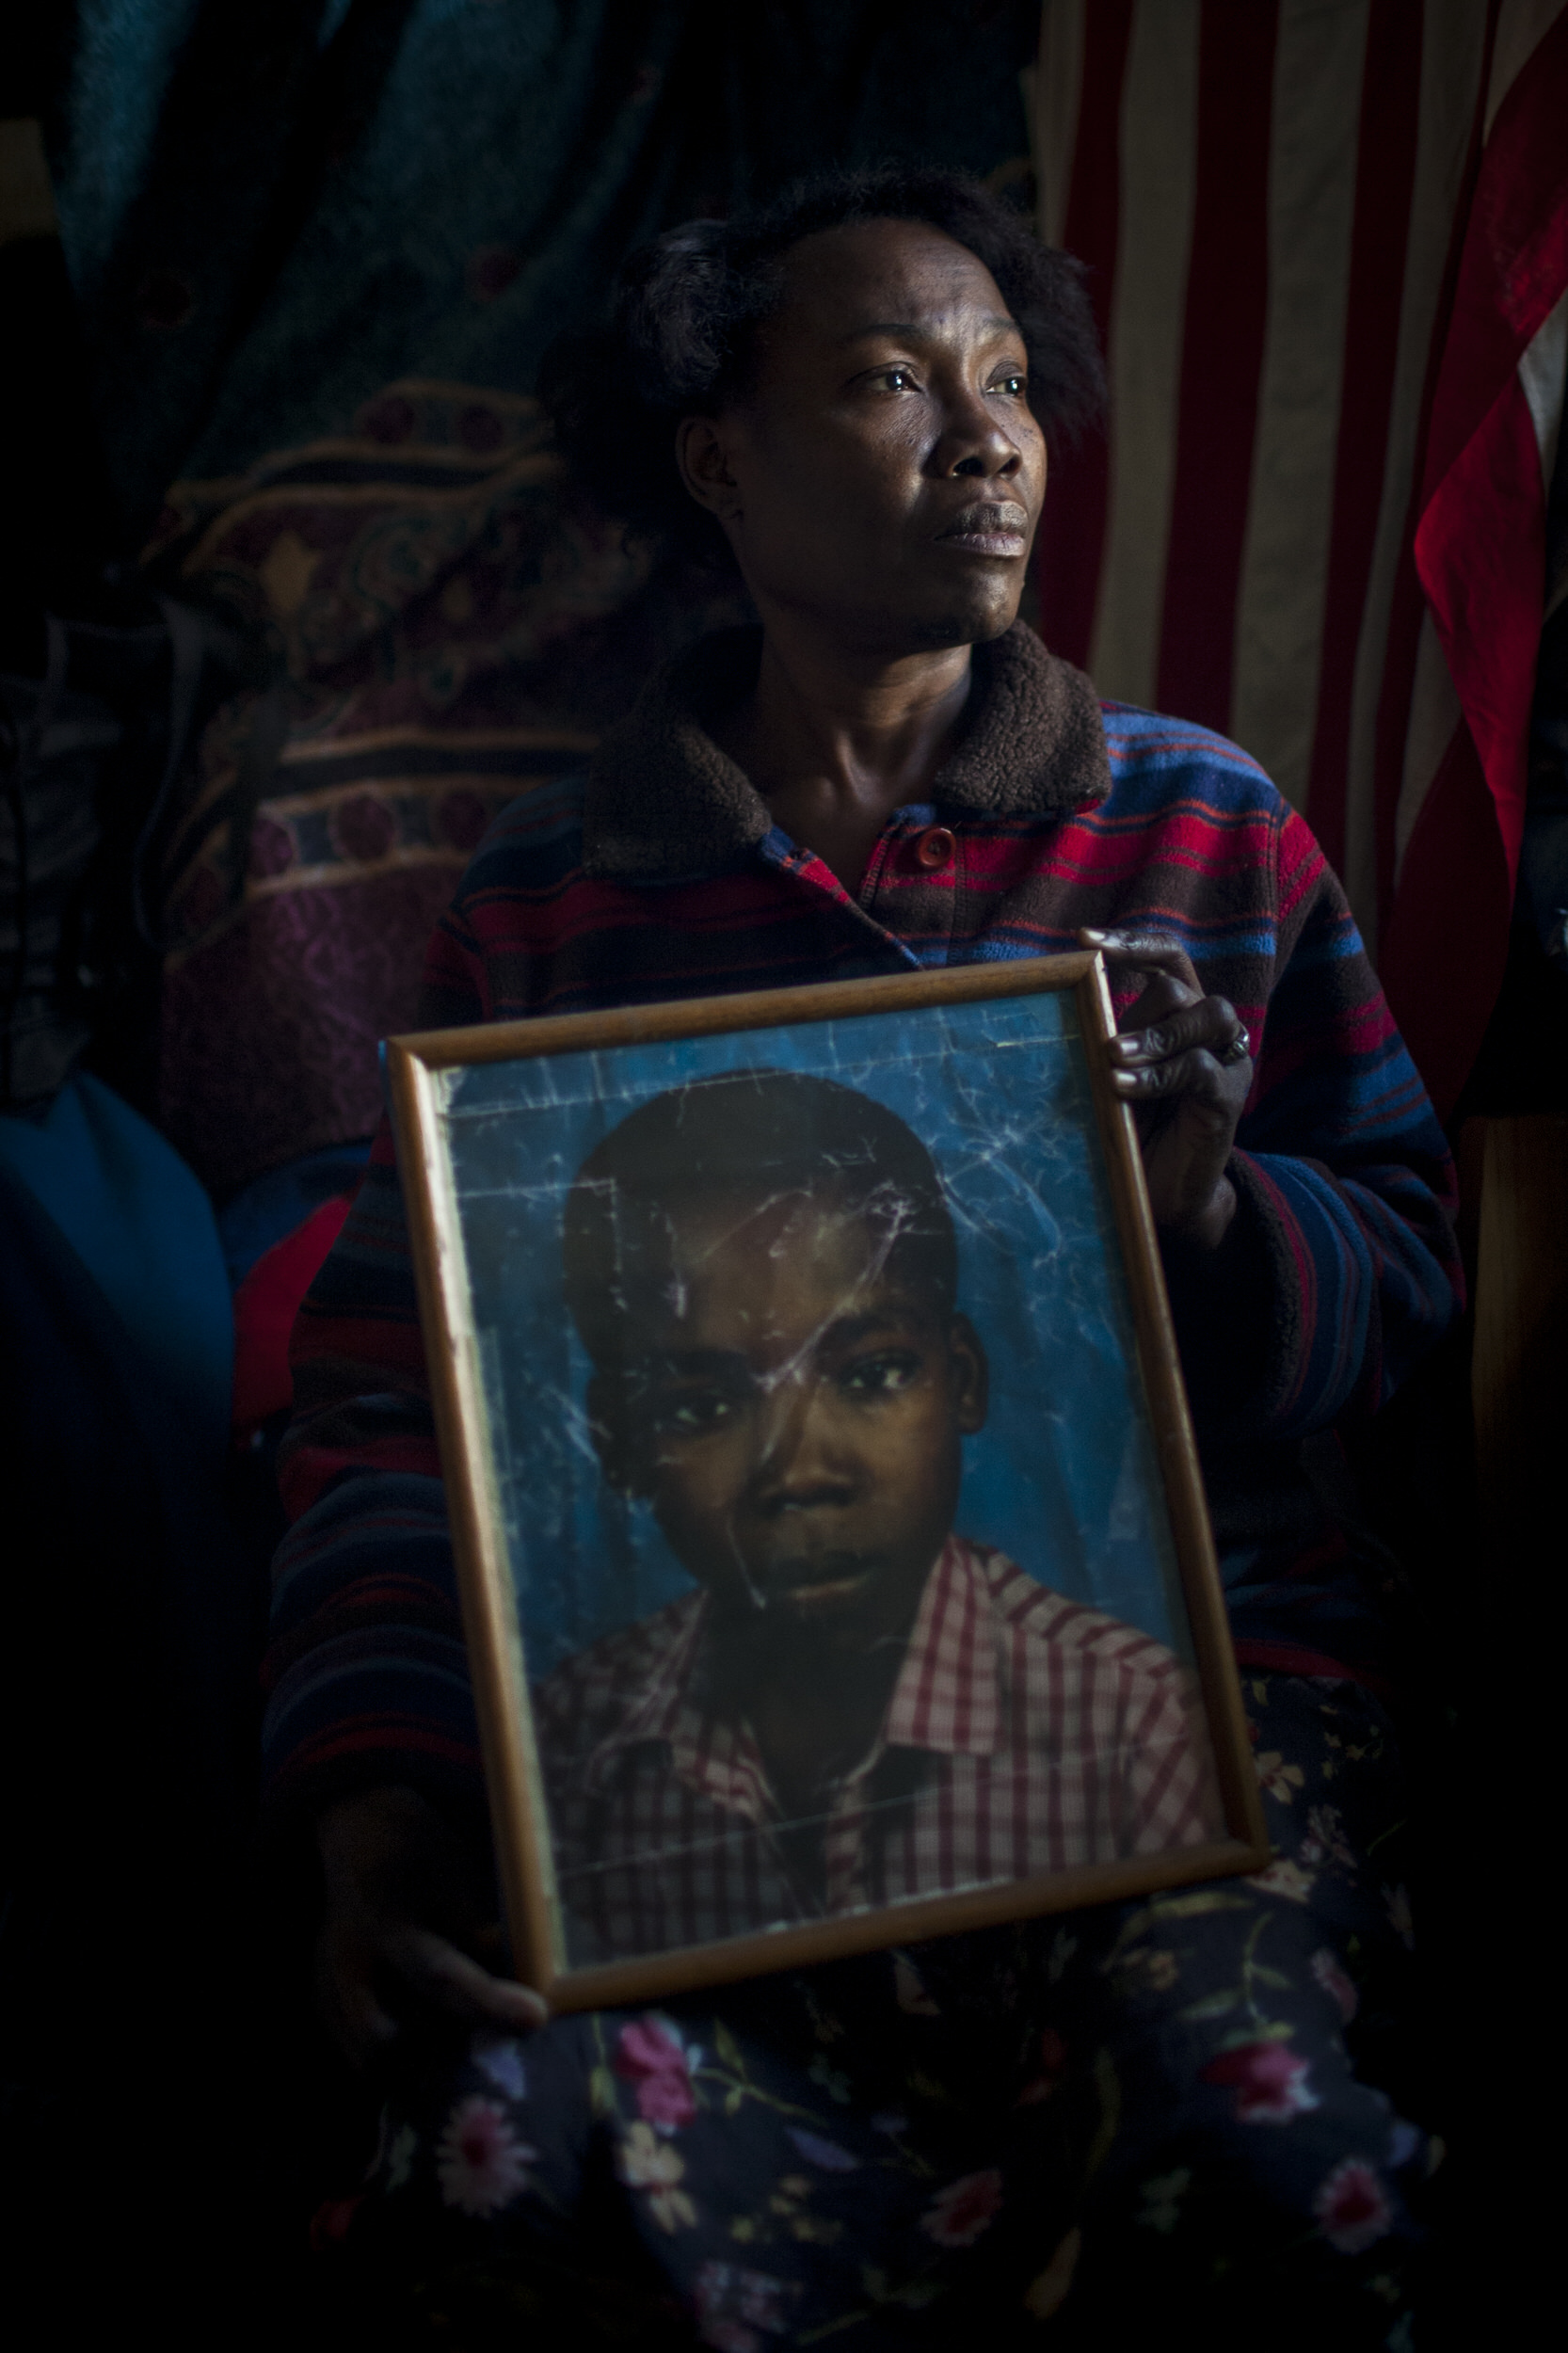  A woman holds a photo of her missing son, later found safe, following a devastating earthquake in Haiti. Brooklyn, NY  